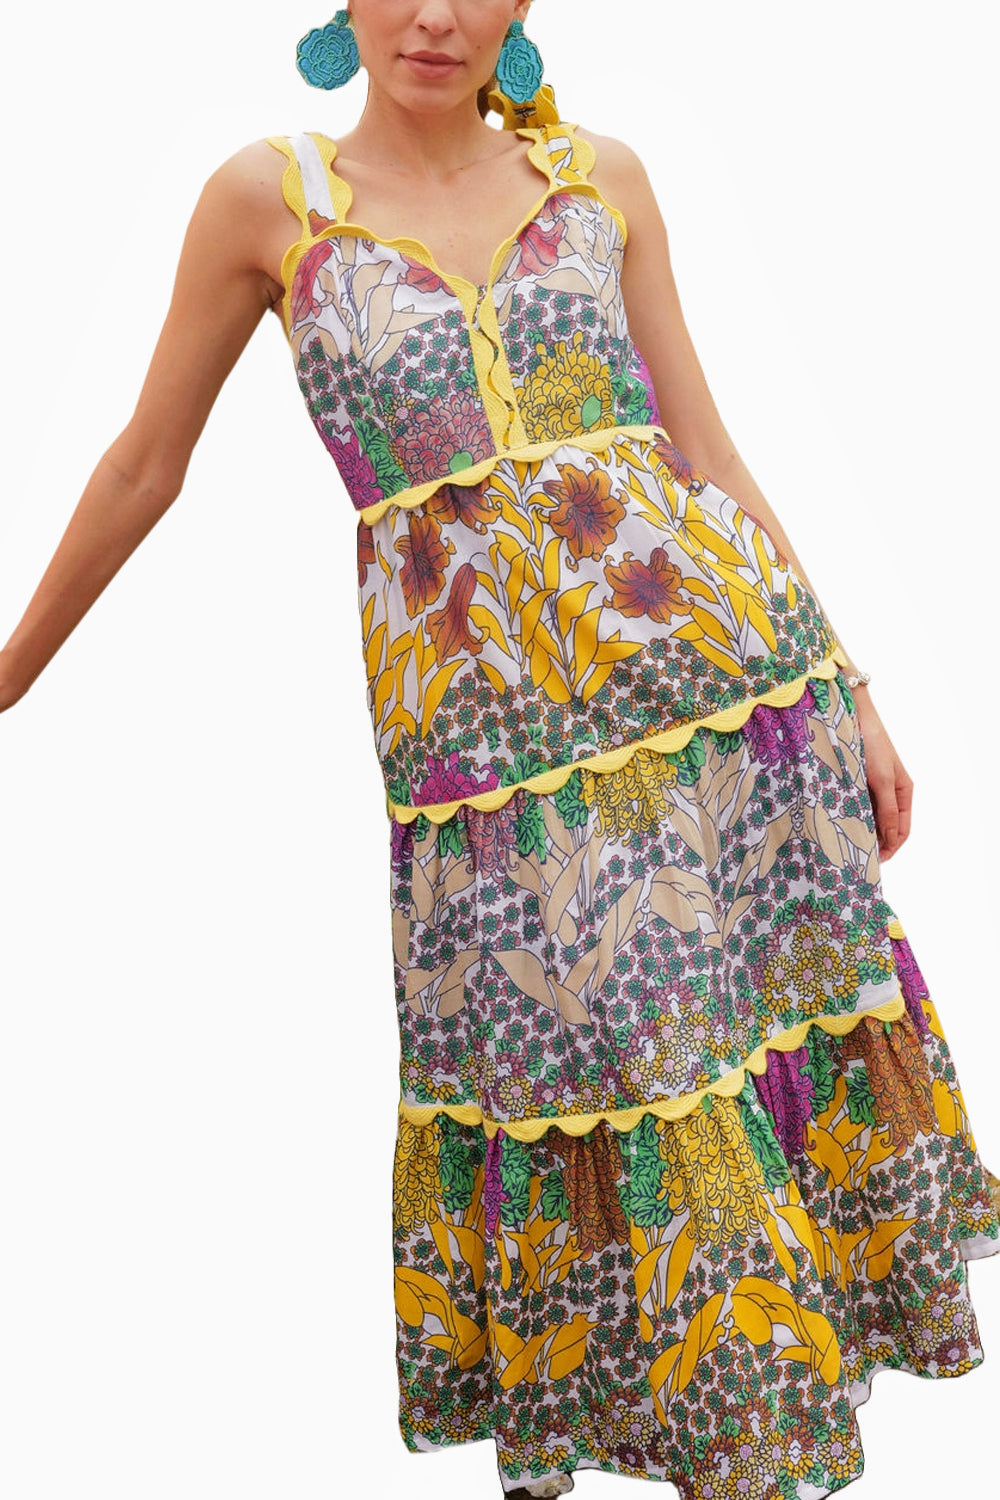 All About Flowers Dress